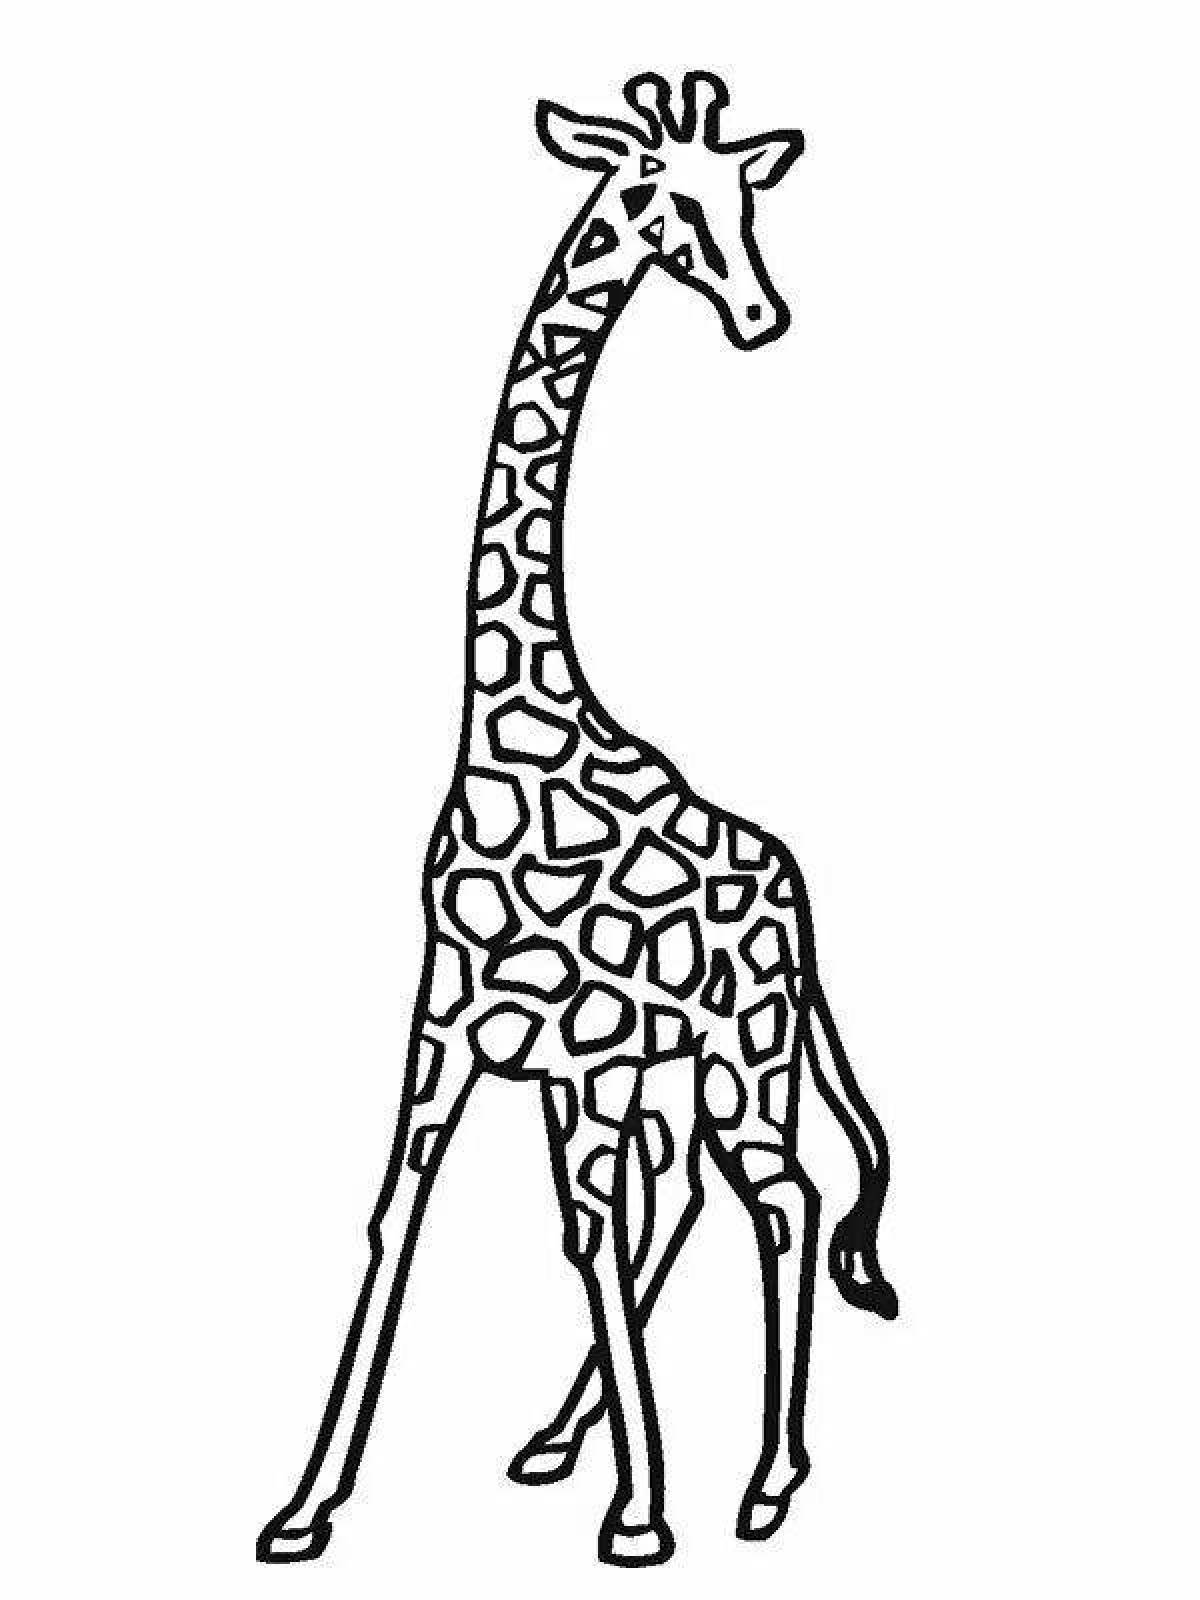 Animated giraffe coloring page